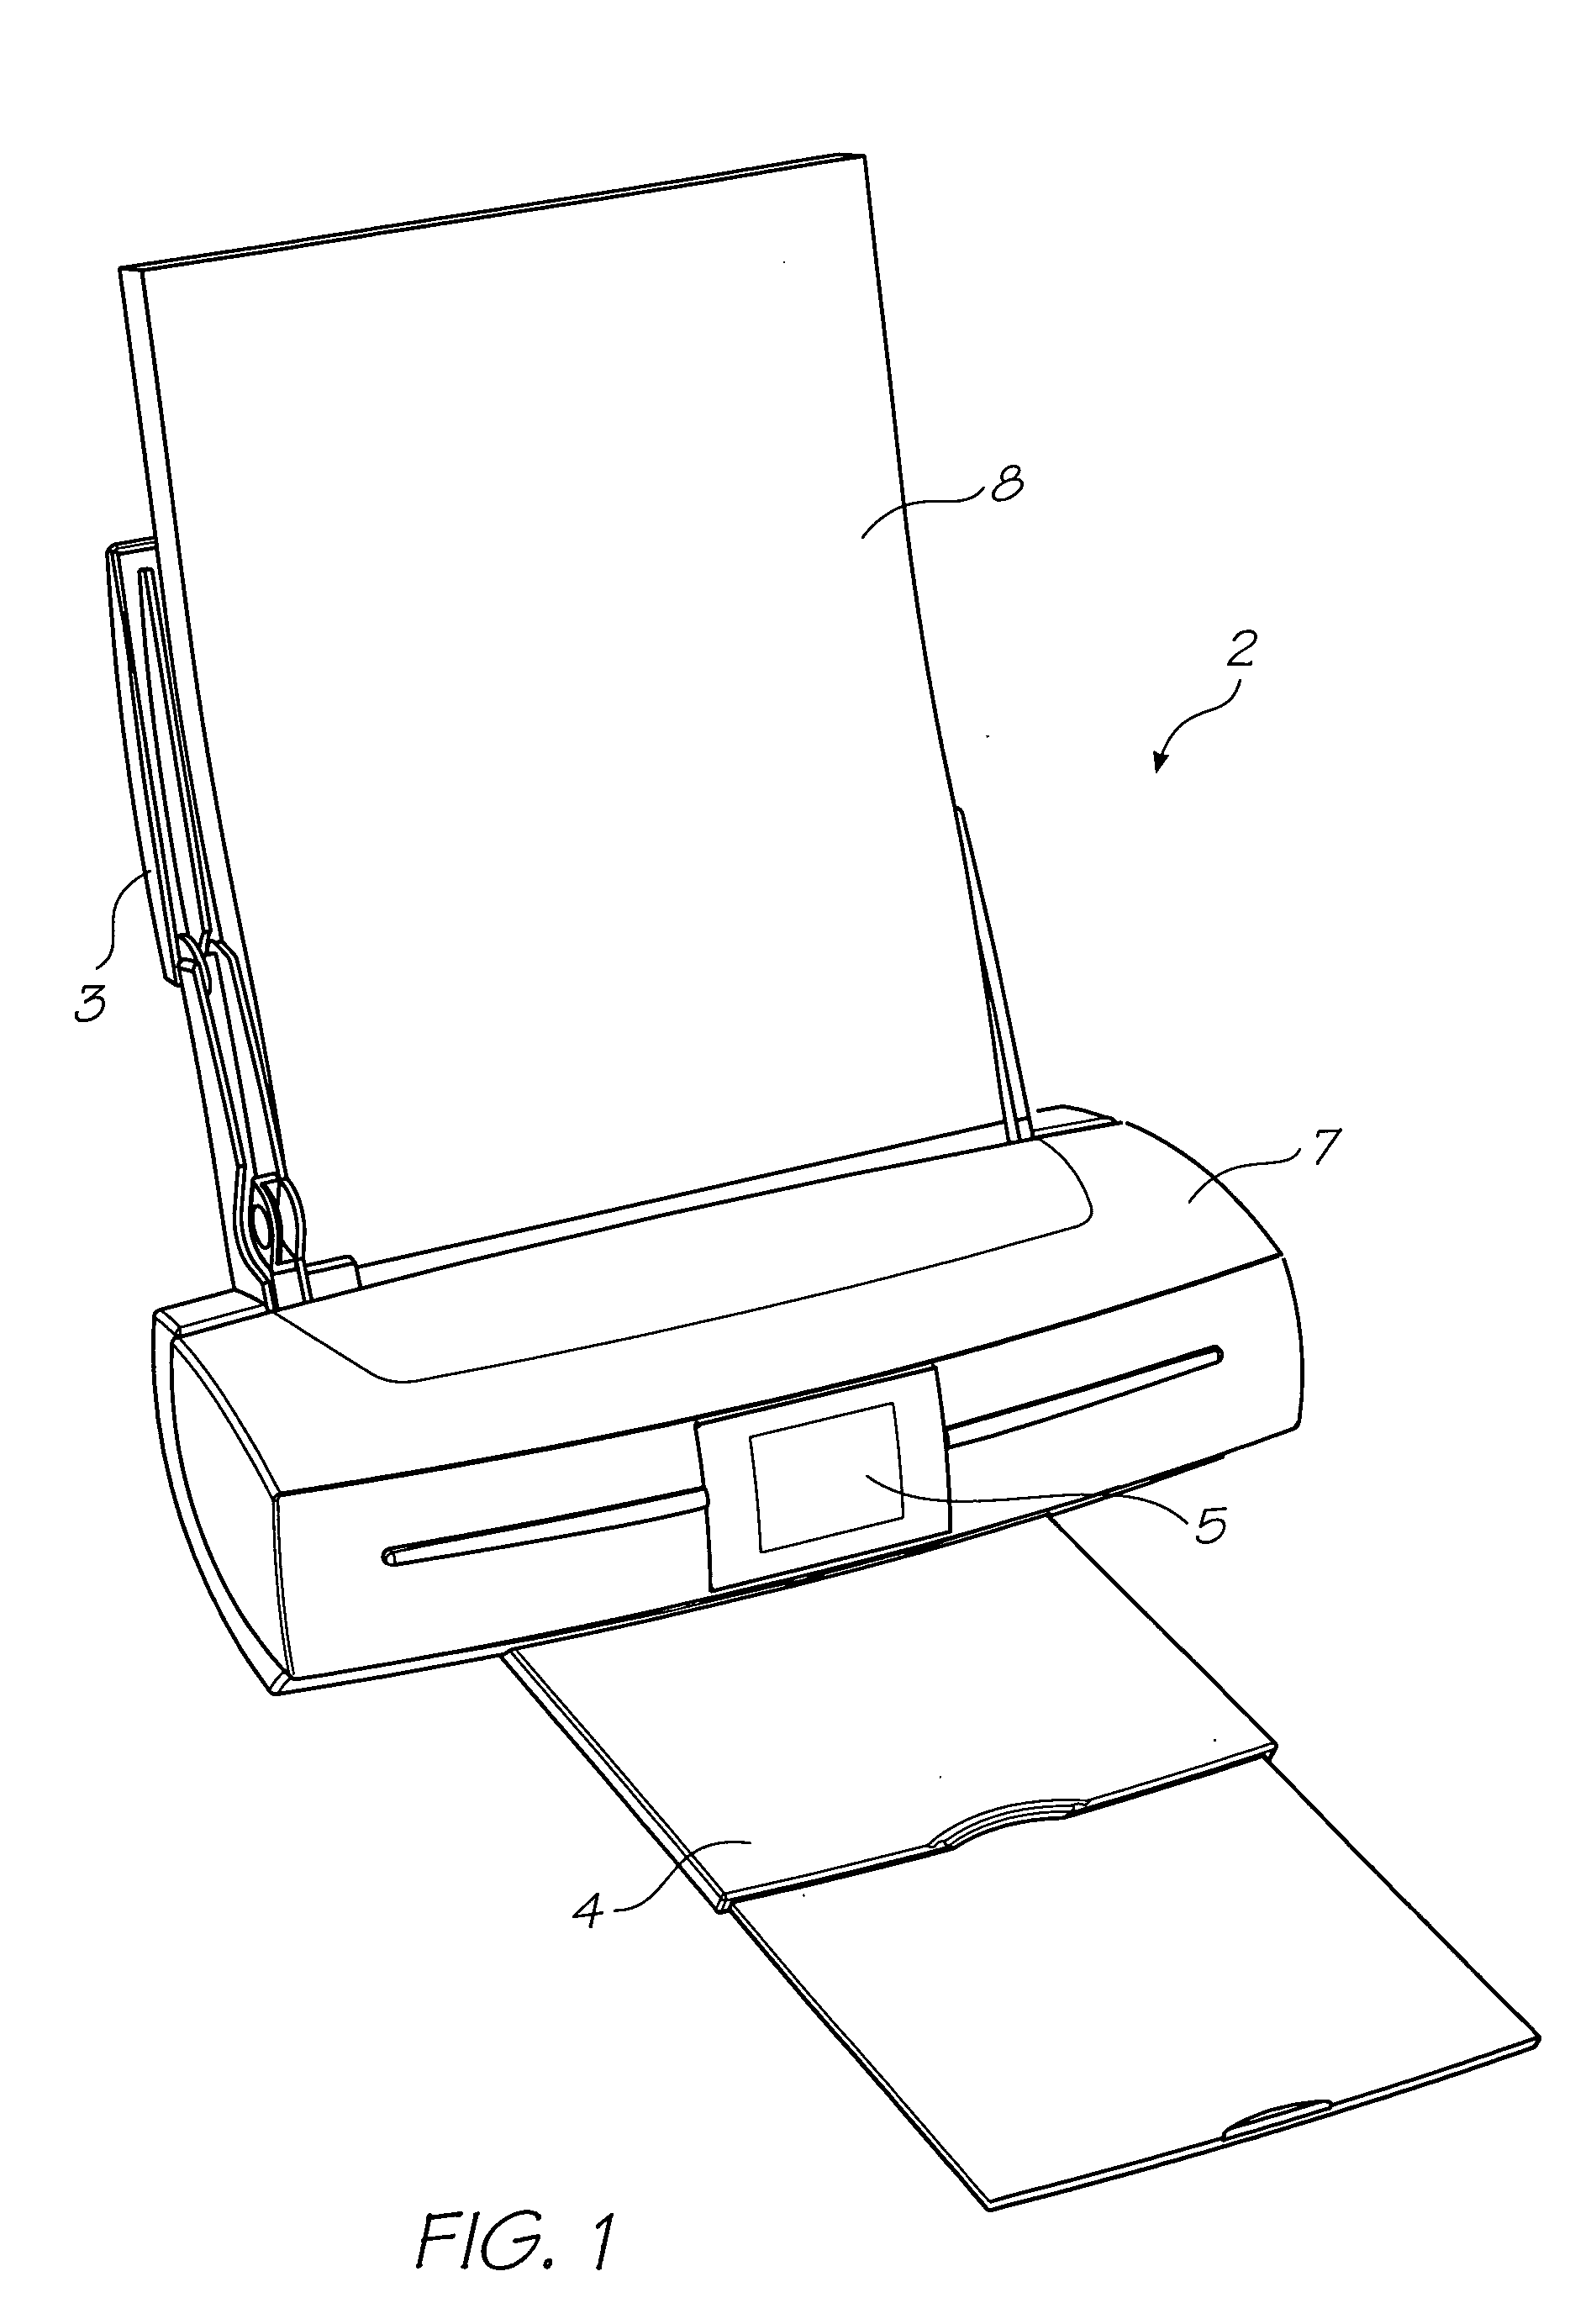 Inkjet printer with cradle for unobstructed access to cartridge